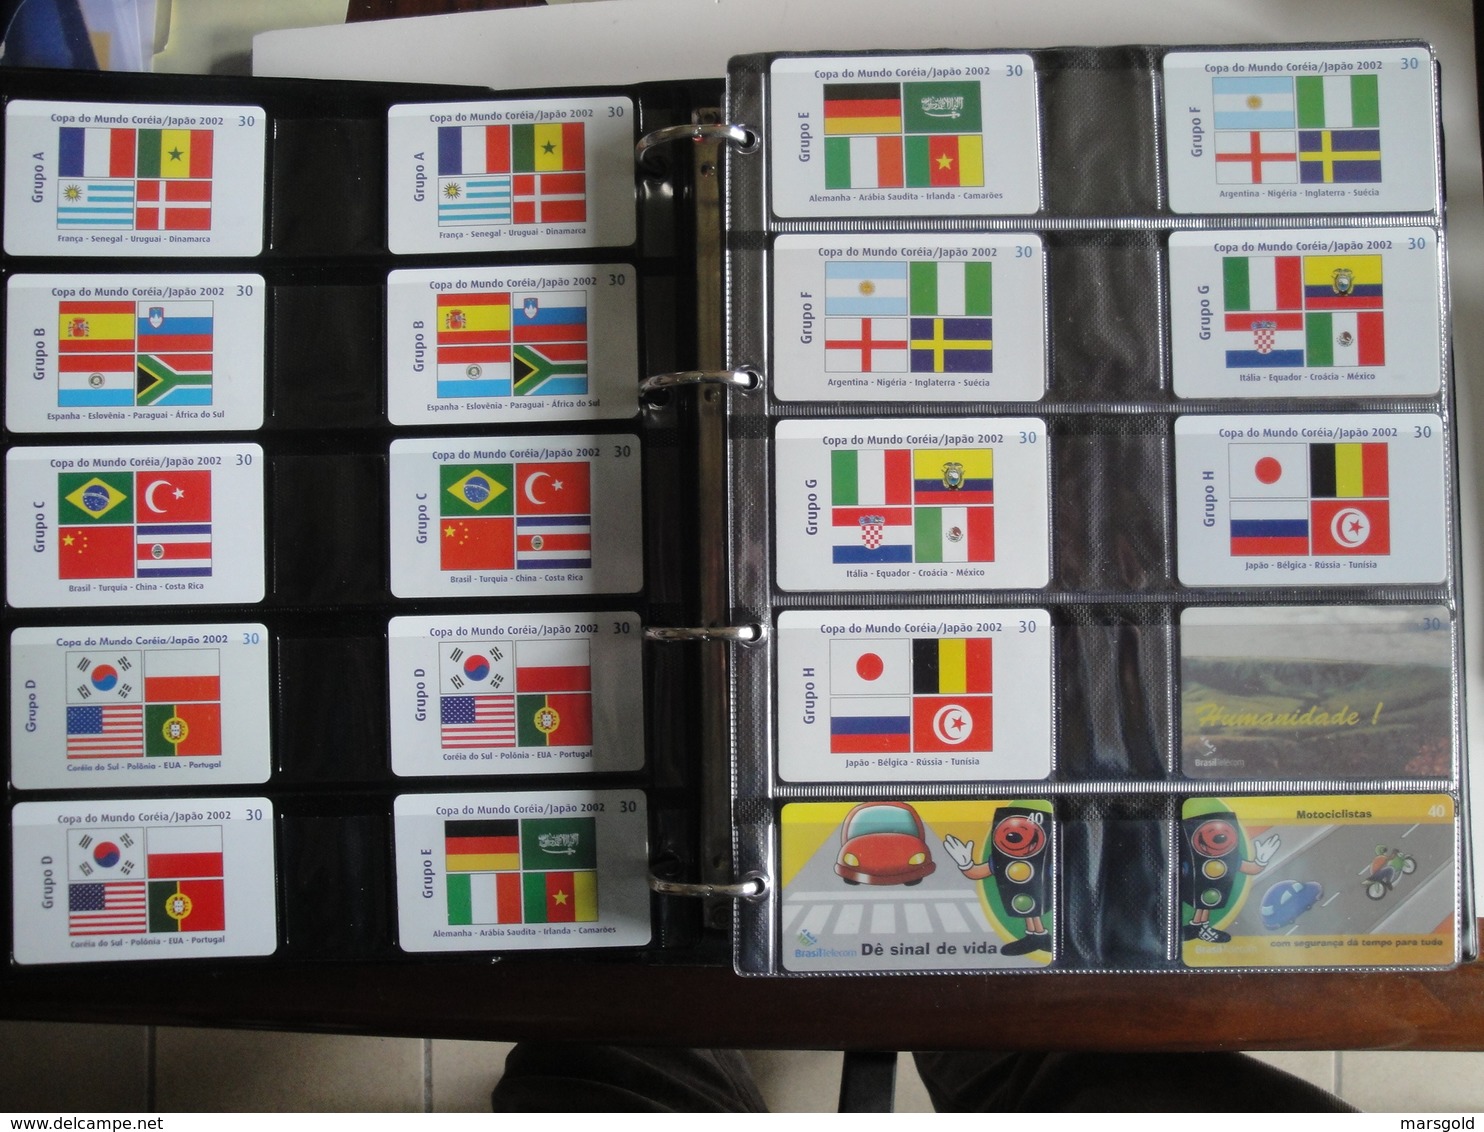 Nice collection of 638 phonecards from Brasil - Brasil Telecom with many nices sets and thematics